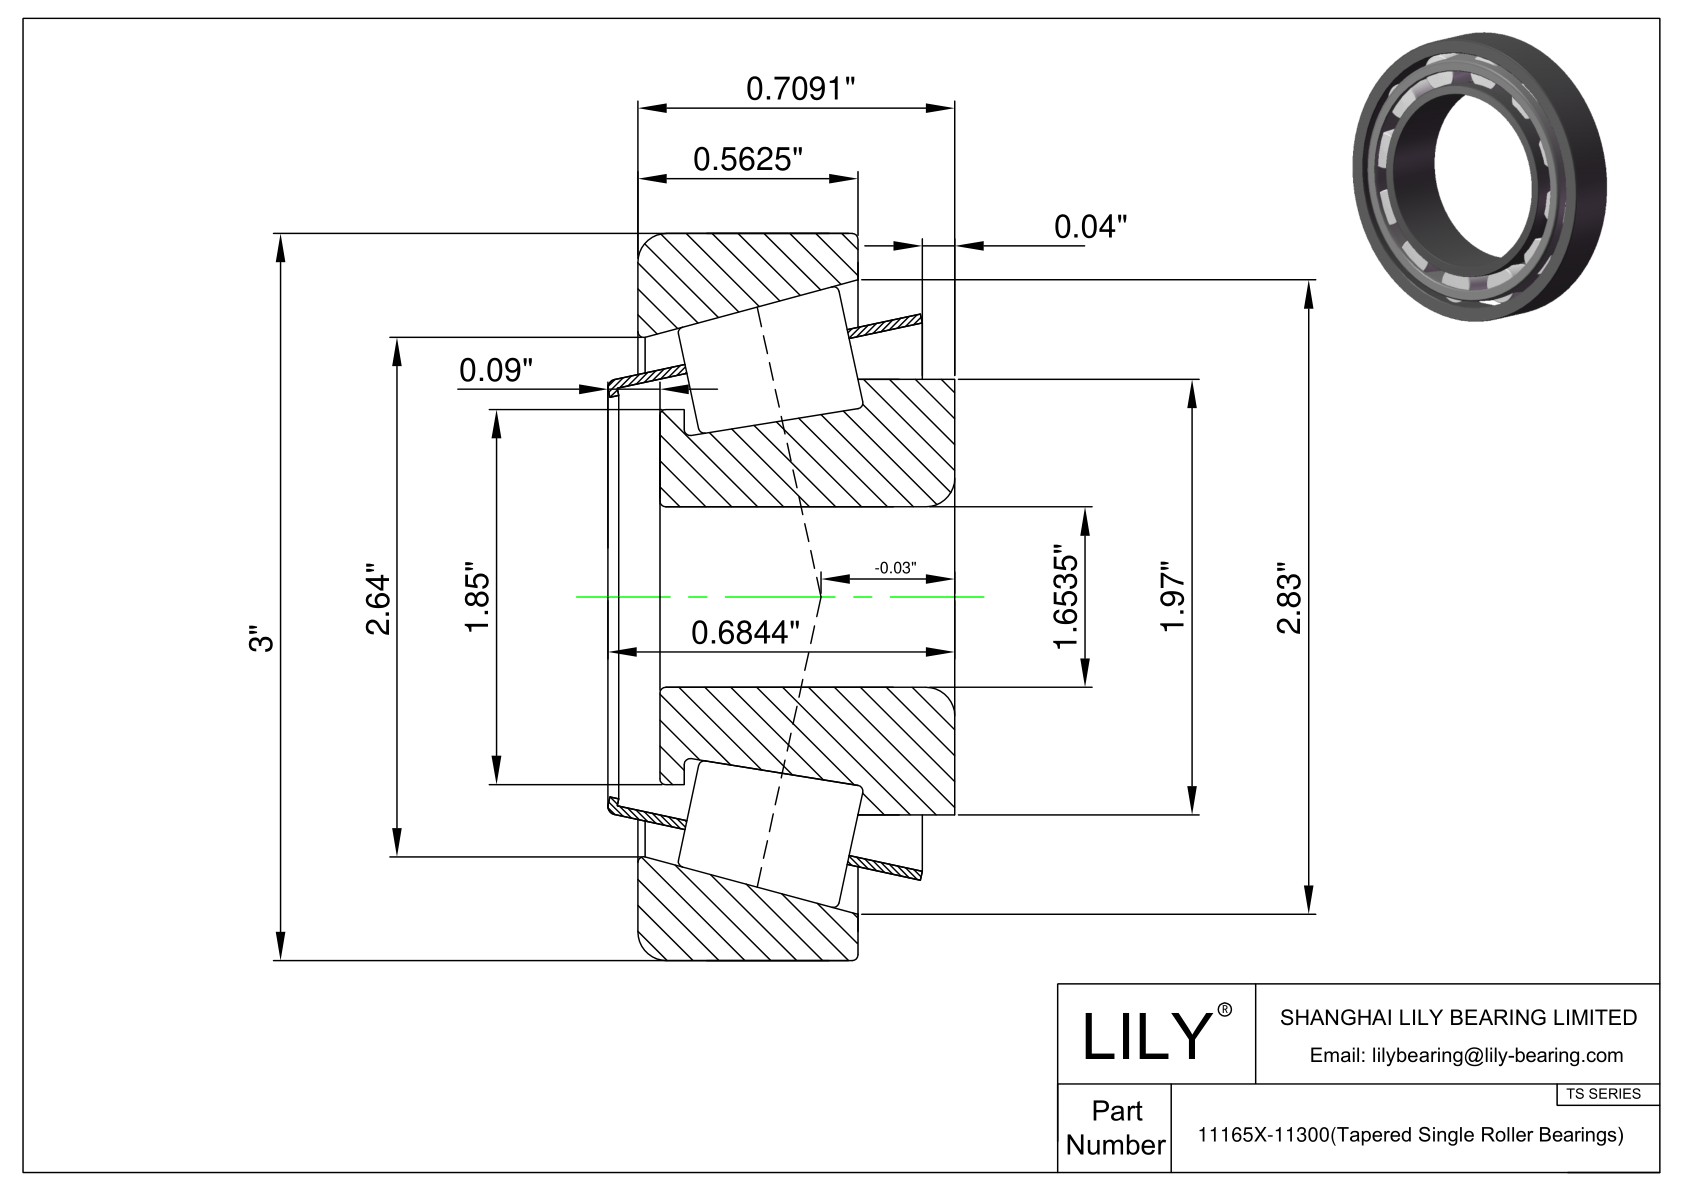 11165X-11300 TS (Tapered Single Roller Bearings) (Imperial) cad drawing